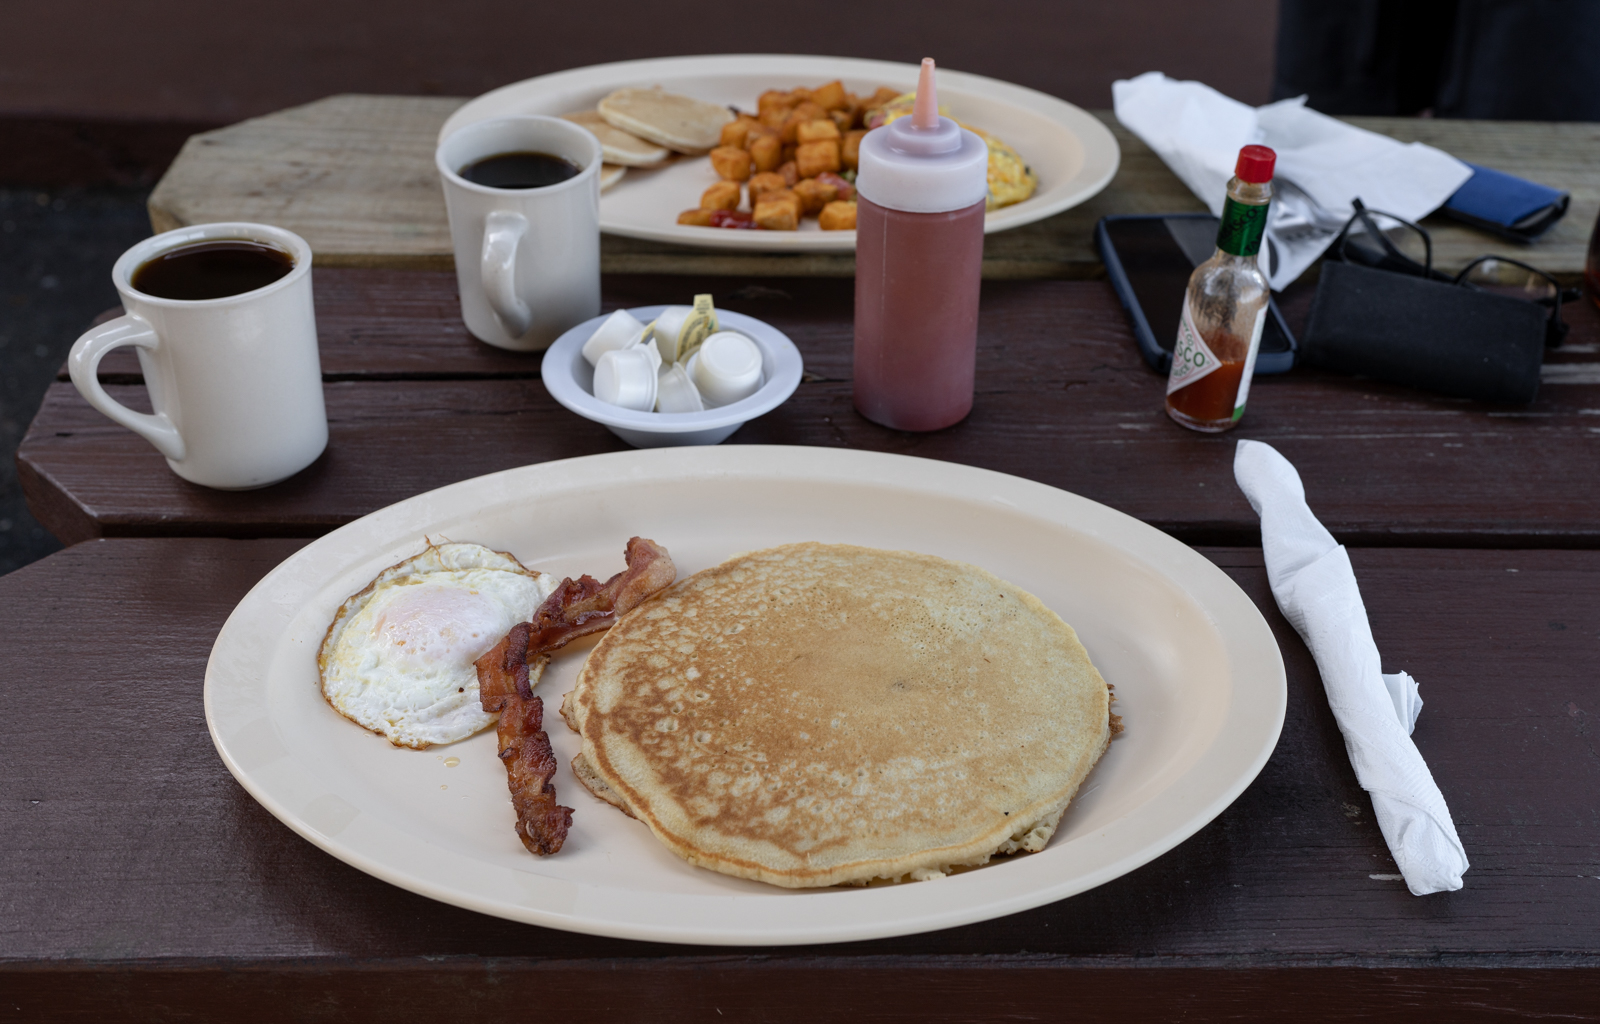 Two plates rest on a wooden picnic table. The plate in the foreground has one pancake, one piece of bacon, and one fried egg on it. There are two coffee cups behind the plate. Pats of butter on a dish, hot sauce, and ketch rest on the table with a pair of glasses and a cell phone. Hashbrowns and eggs, and small pancakes are on the other plate. 